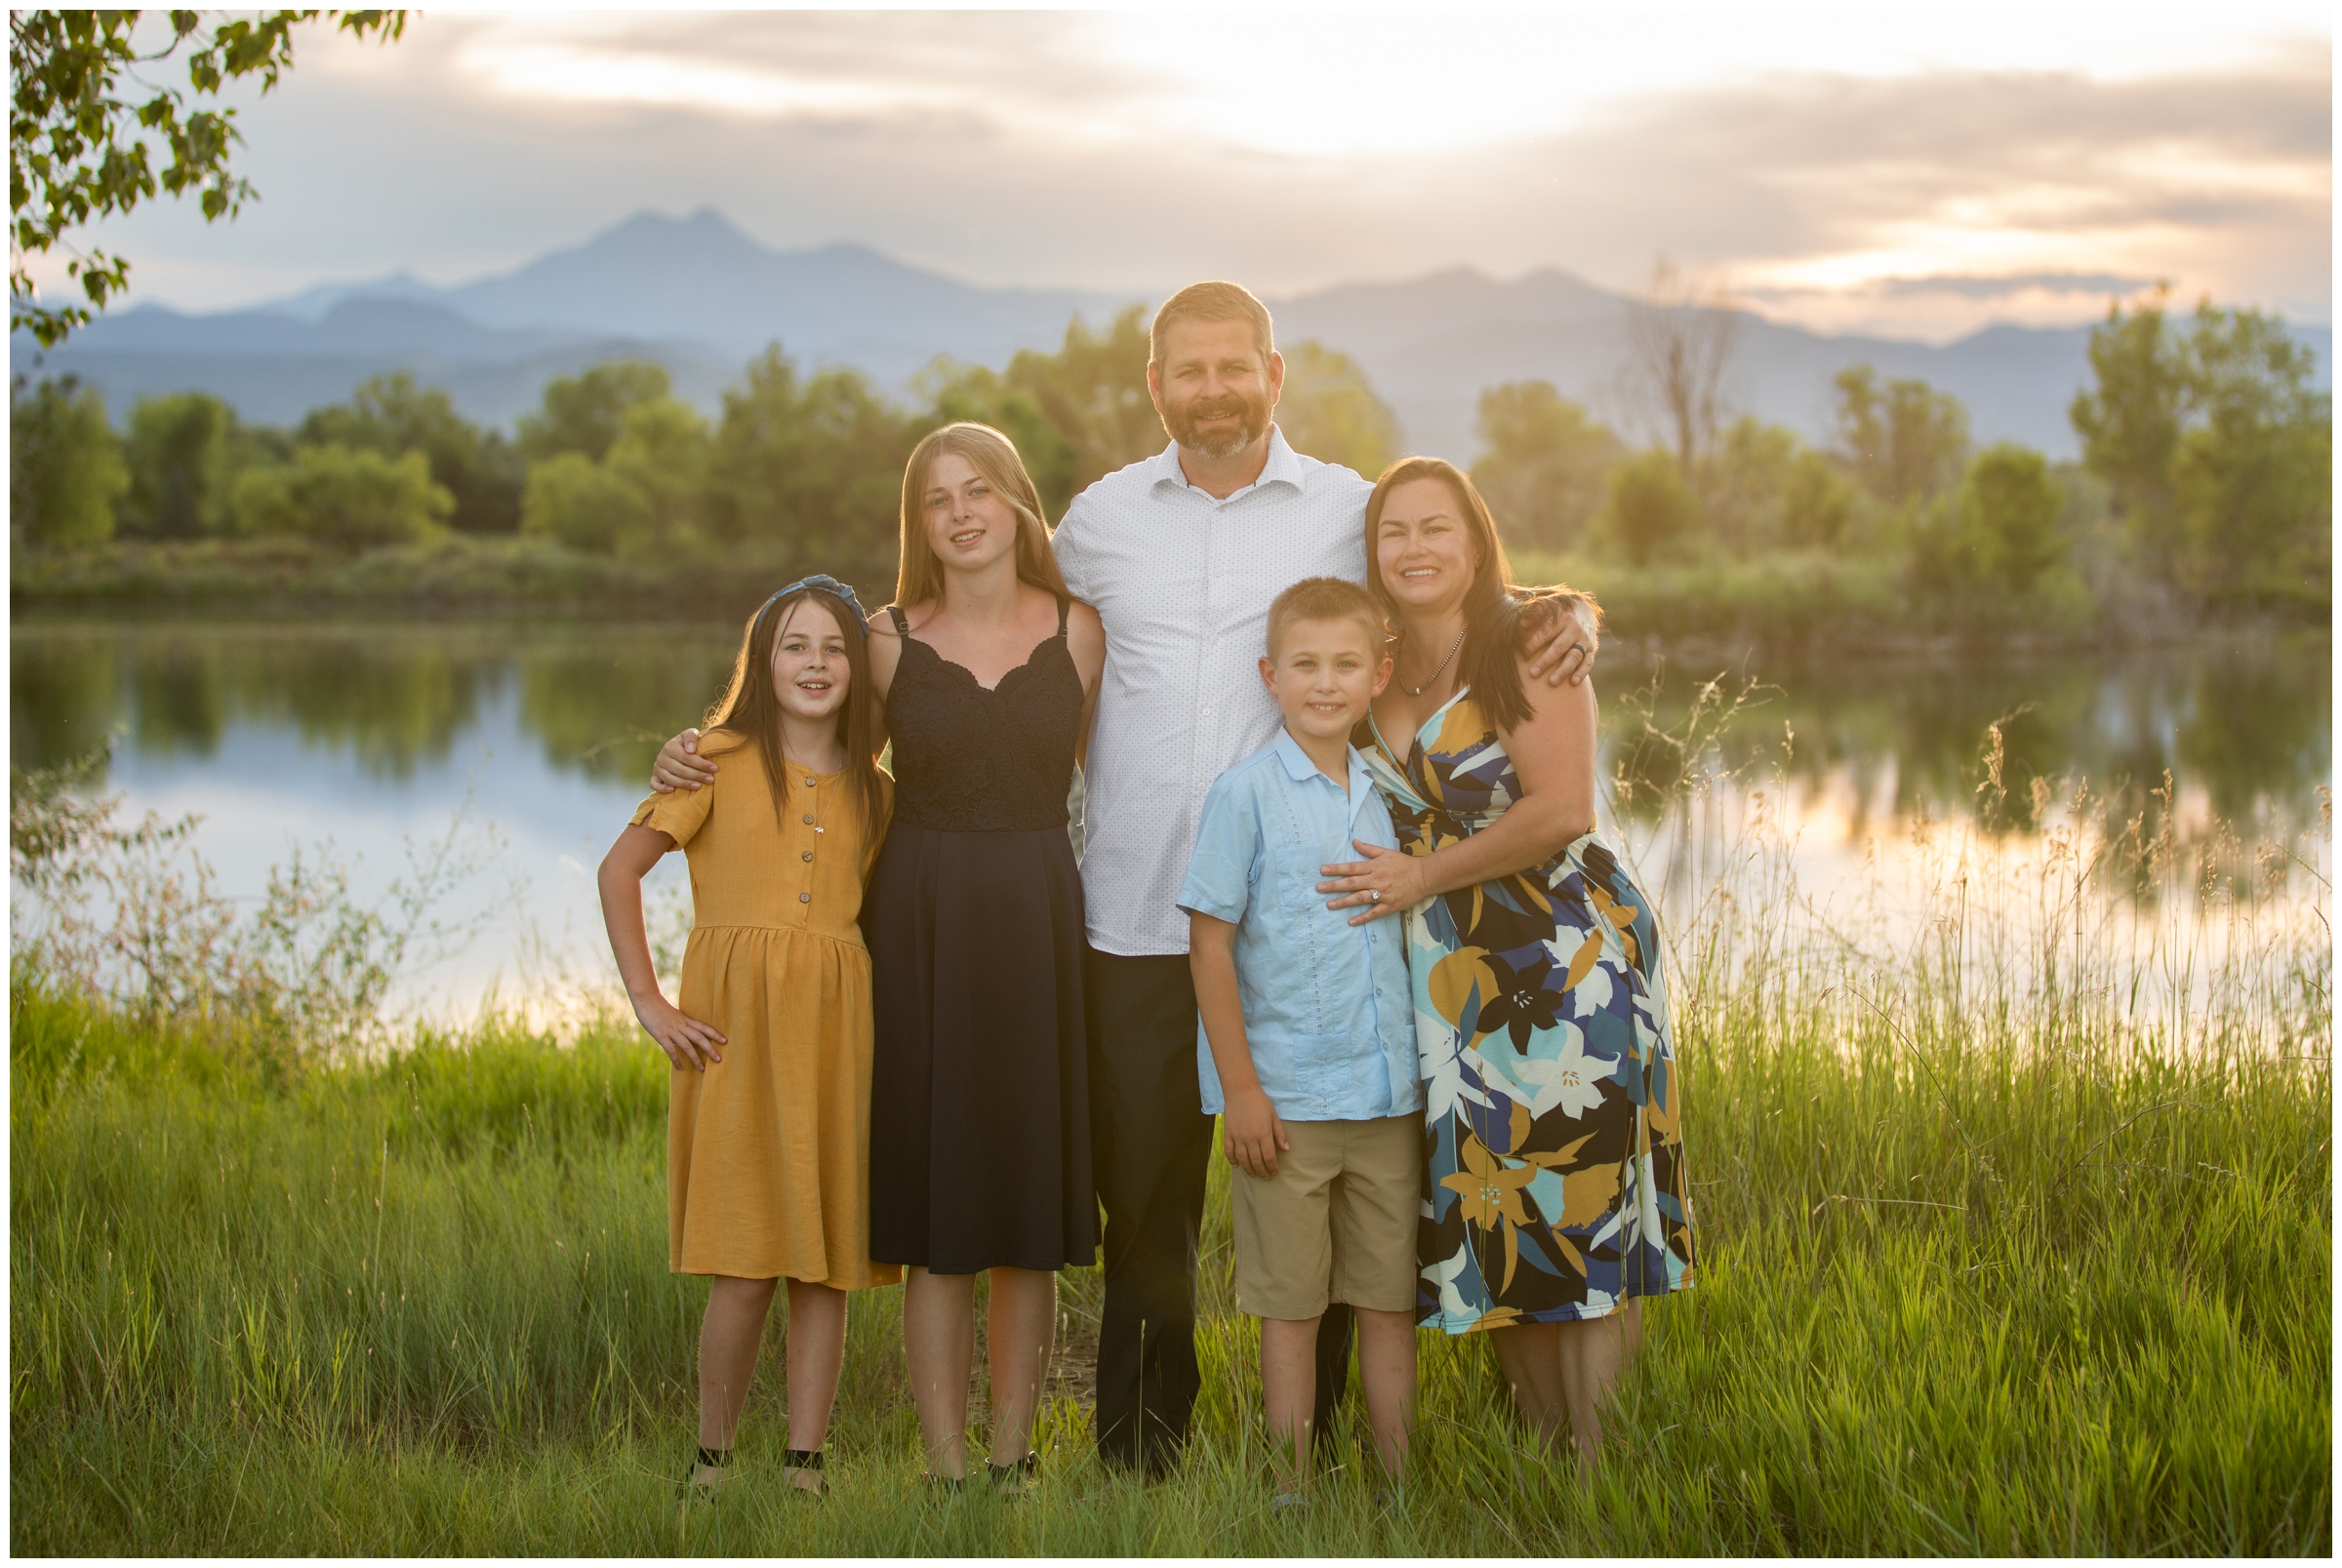 sunset mountain family photos at Golden Ponds by Longmont photographer Plum Pretty Photography 